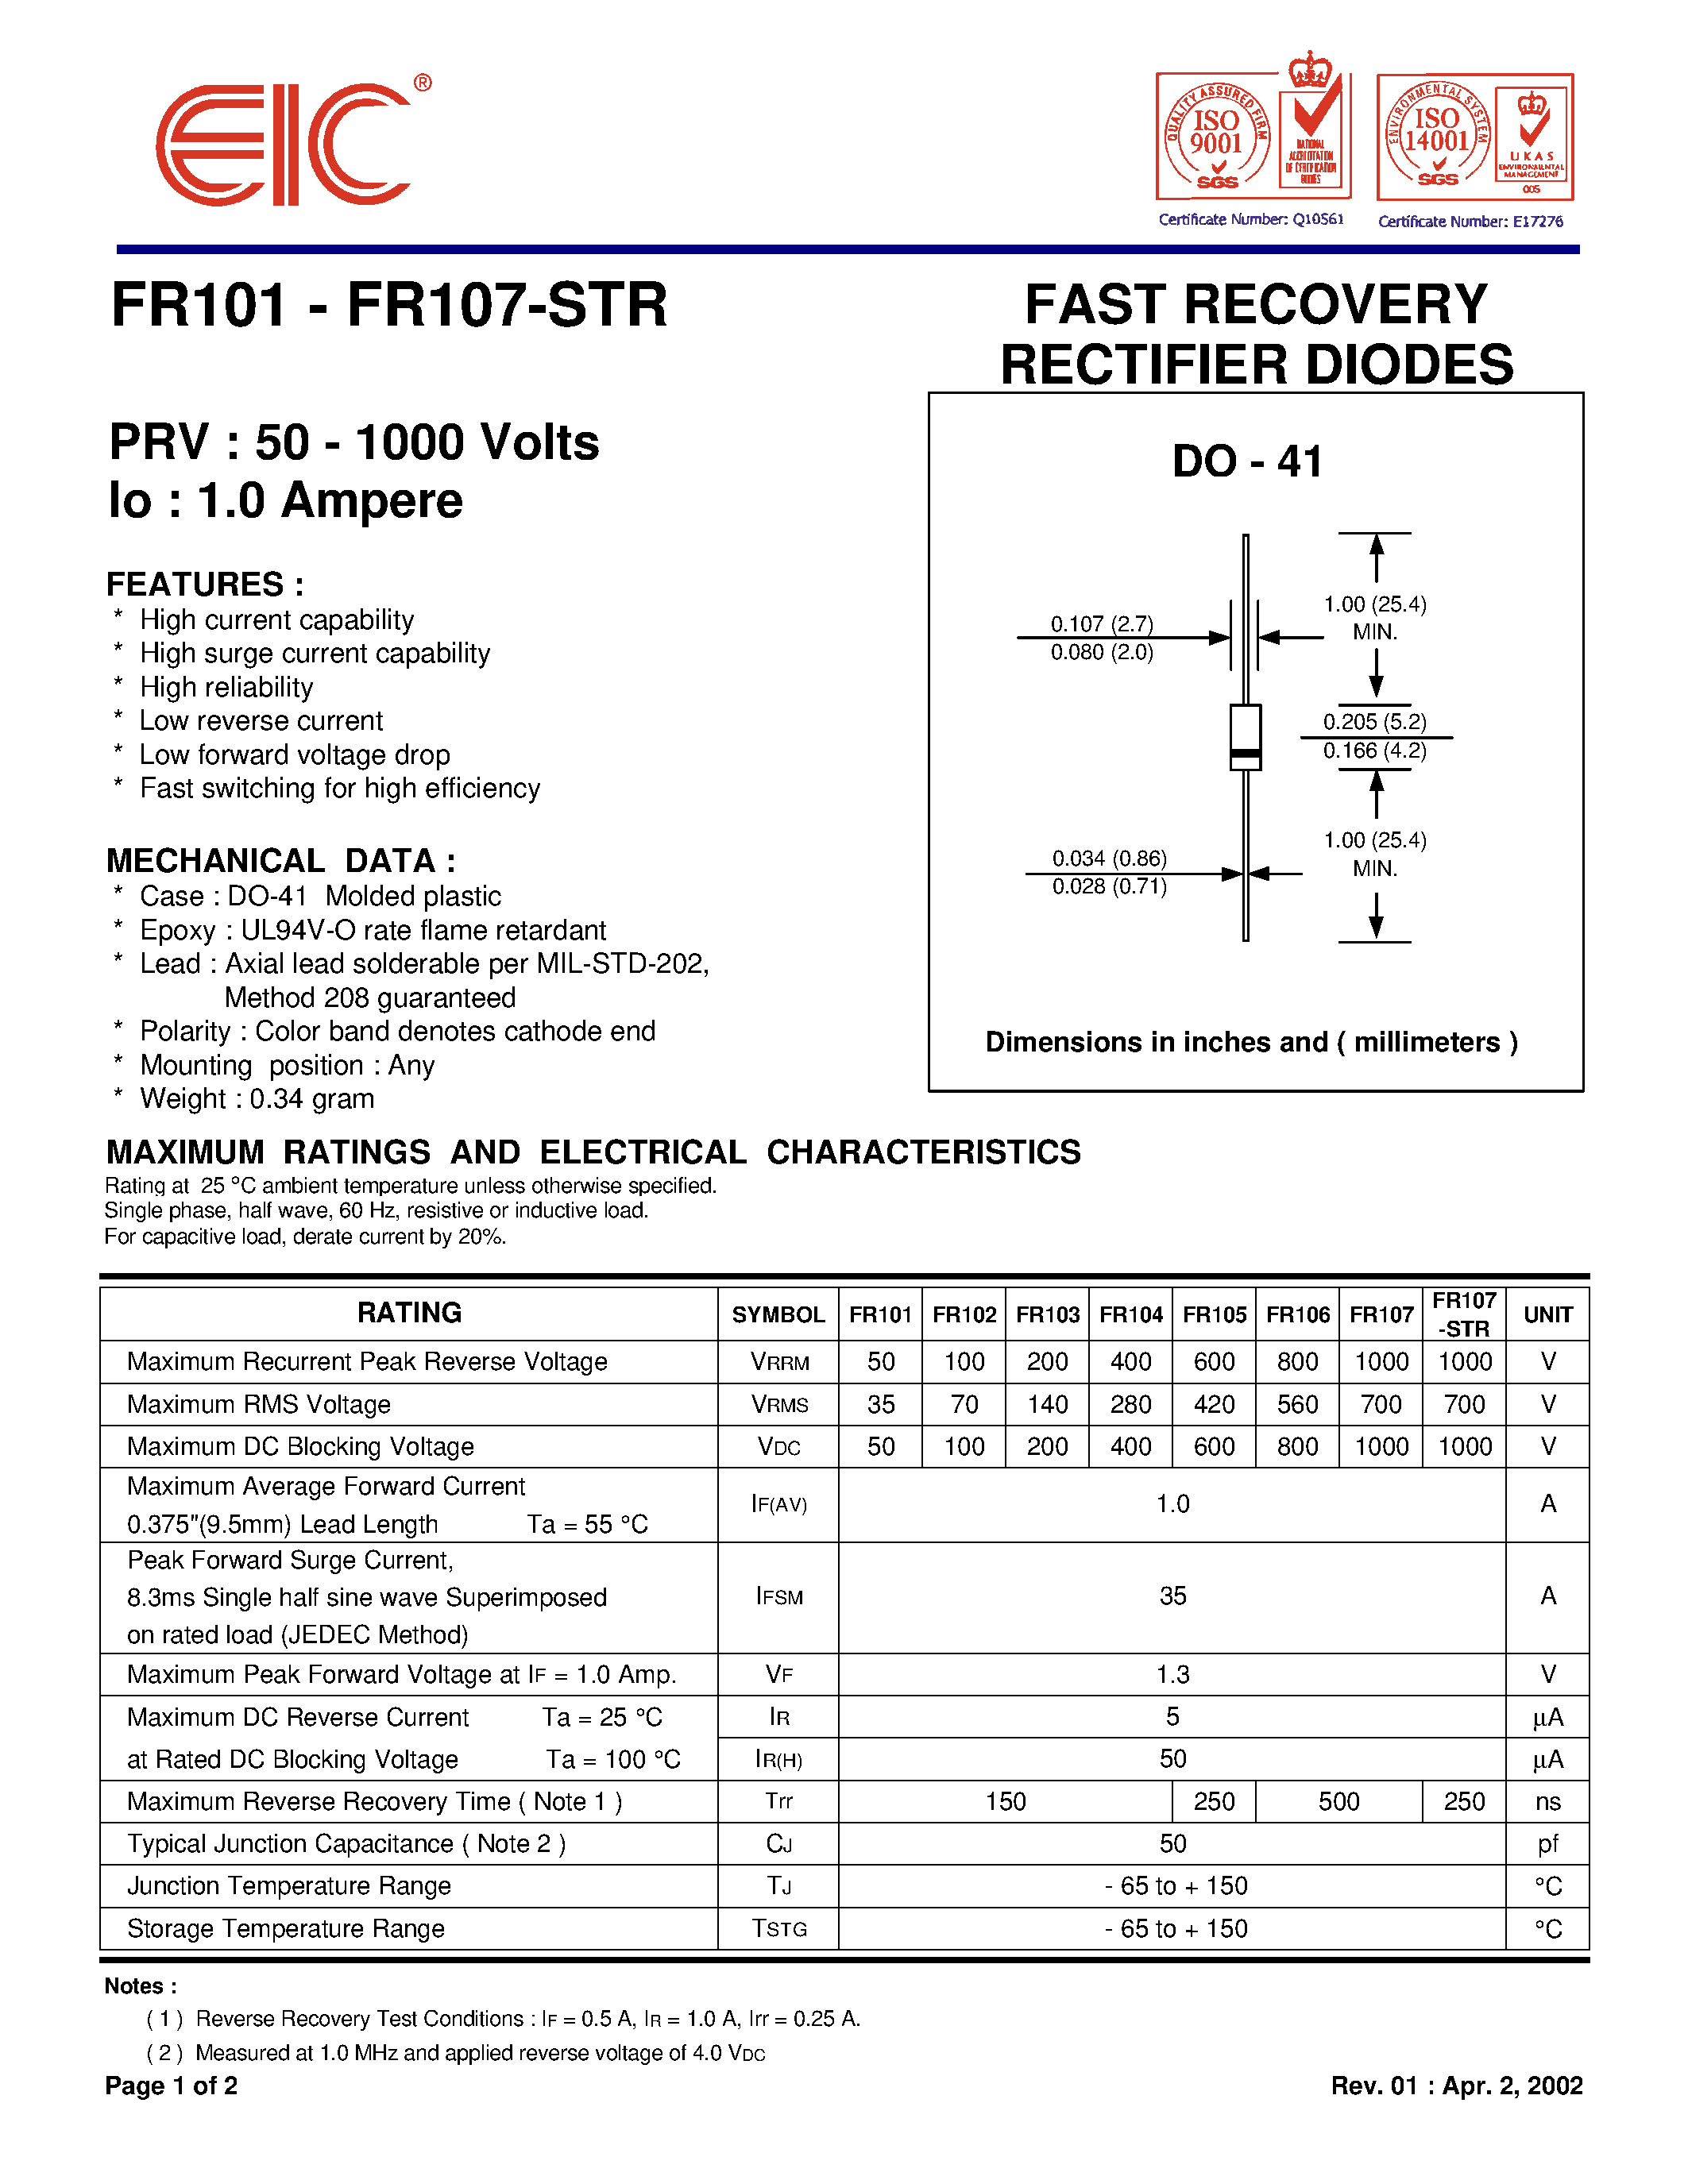 Даташит FR101 - FAST RECOVERY RECTIFIER DIODES страница 1